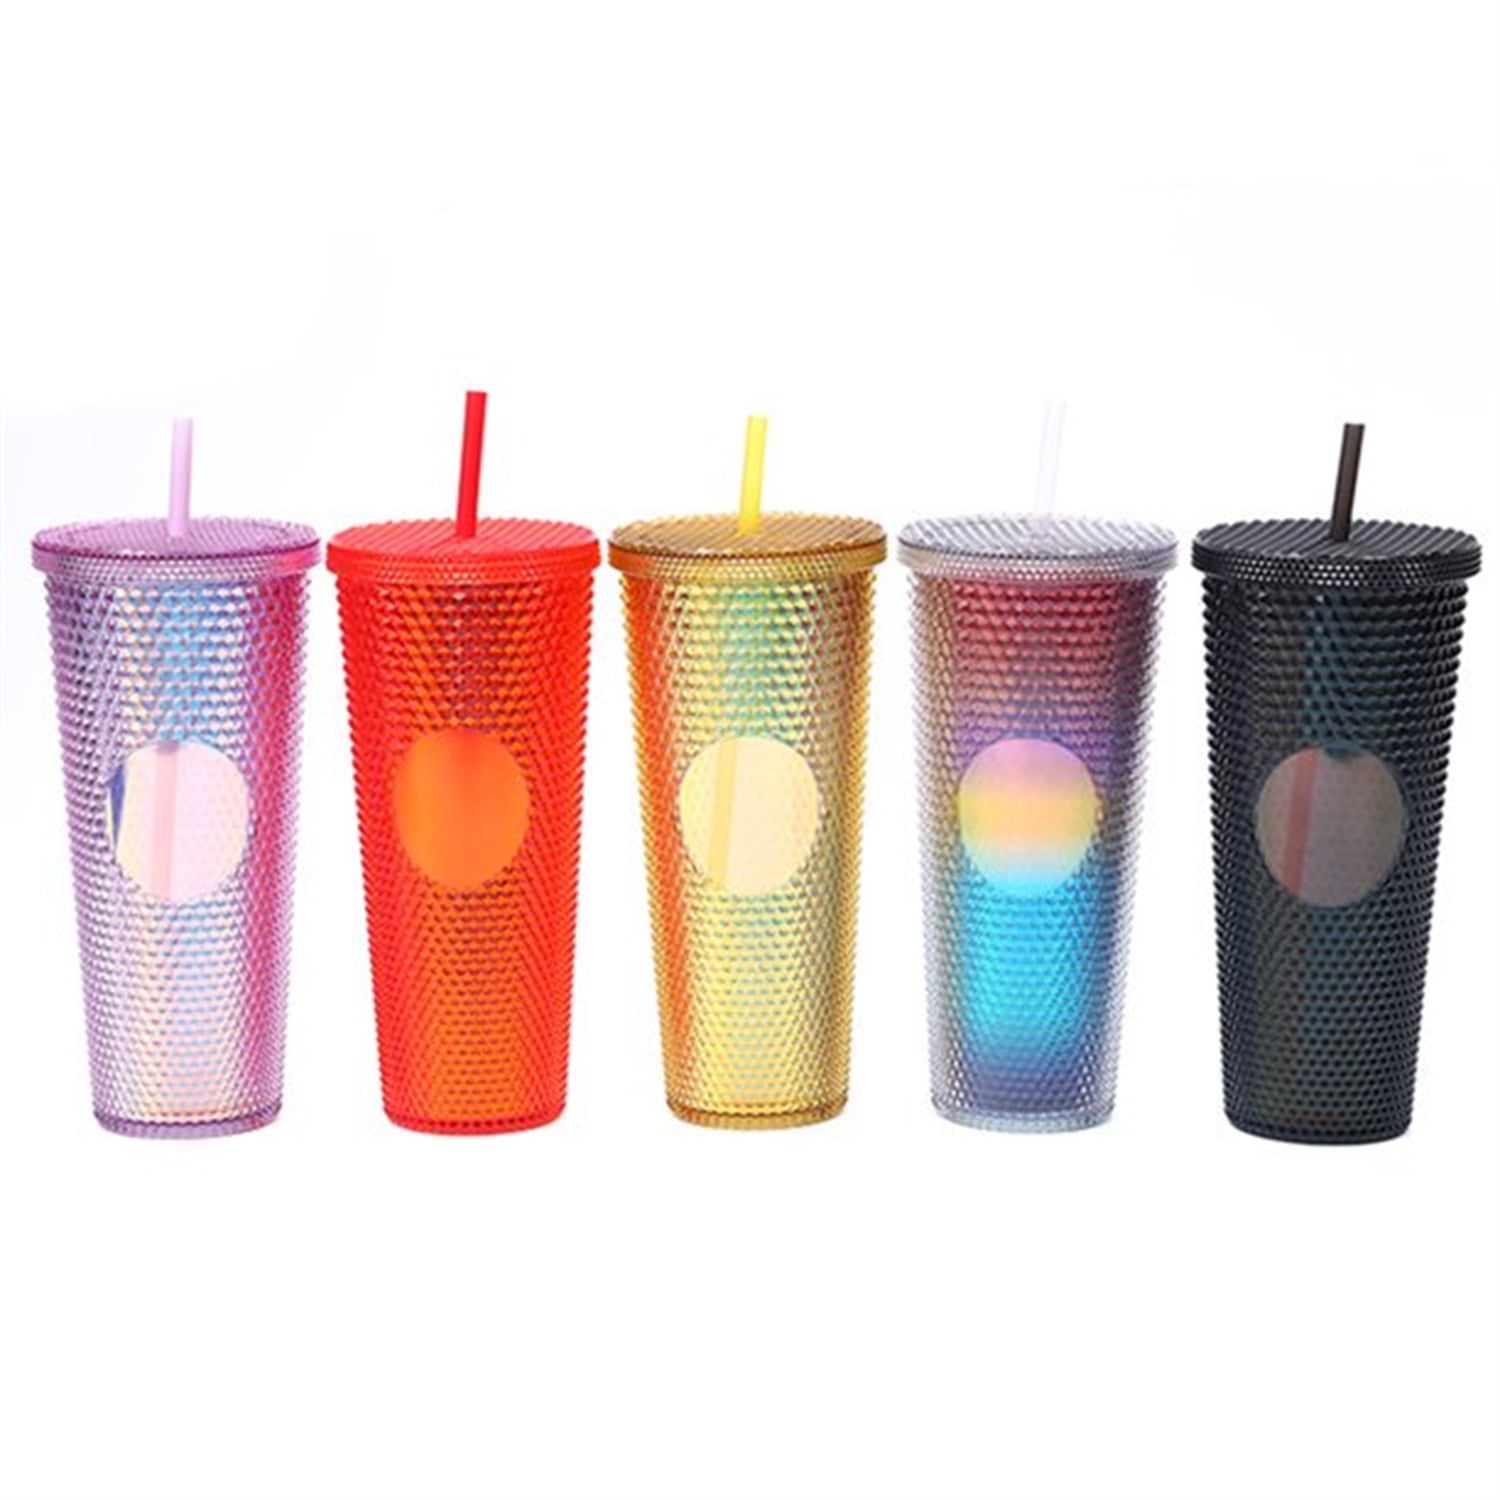 Cabilock 2pcs Cup with Straw with Cover Iced Coffee Cup Smoothie Cups with  Lids and Straws Kids Drin…See more Cabilock 2pcs Cup with Straw with Cover